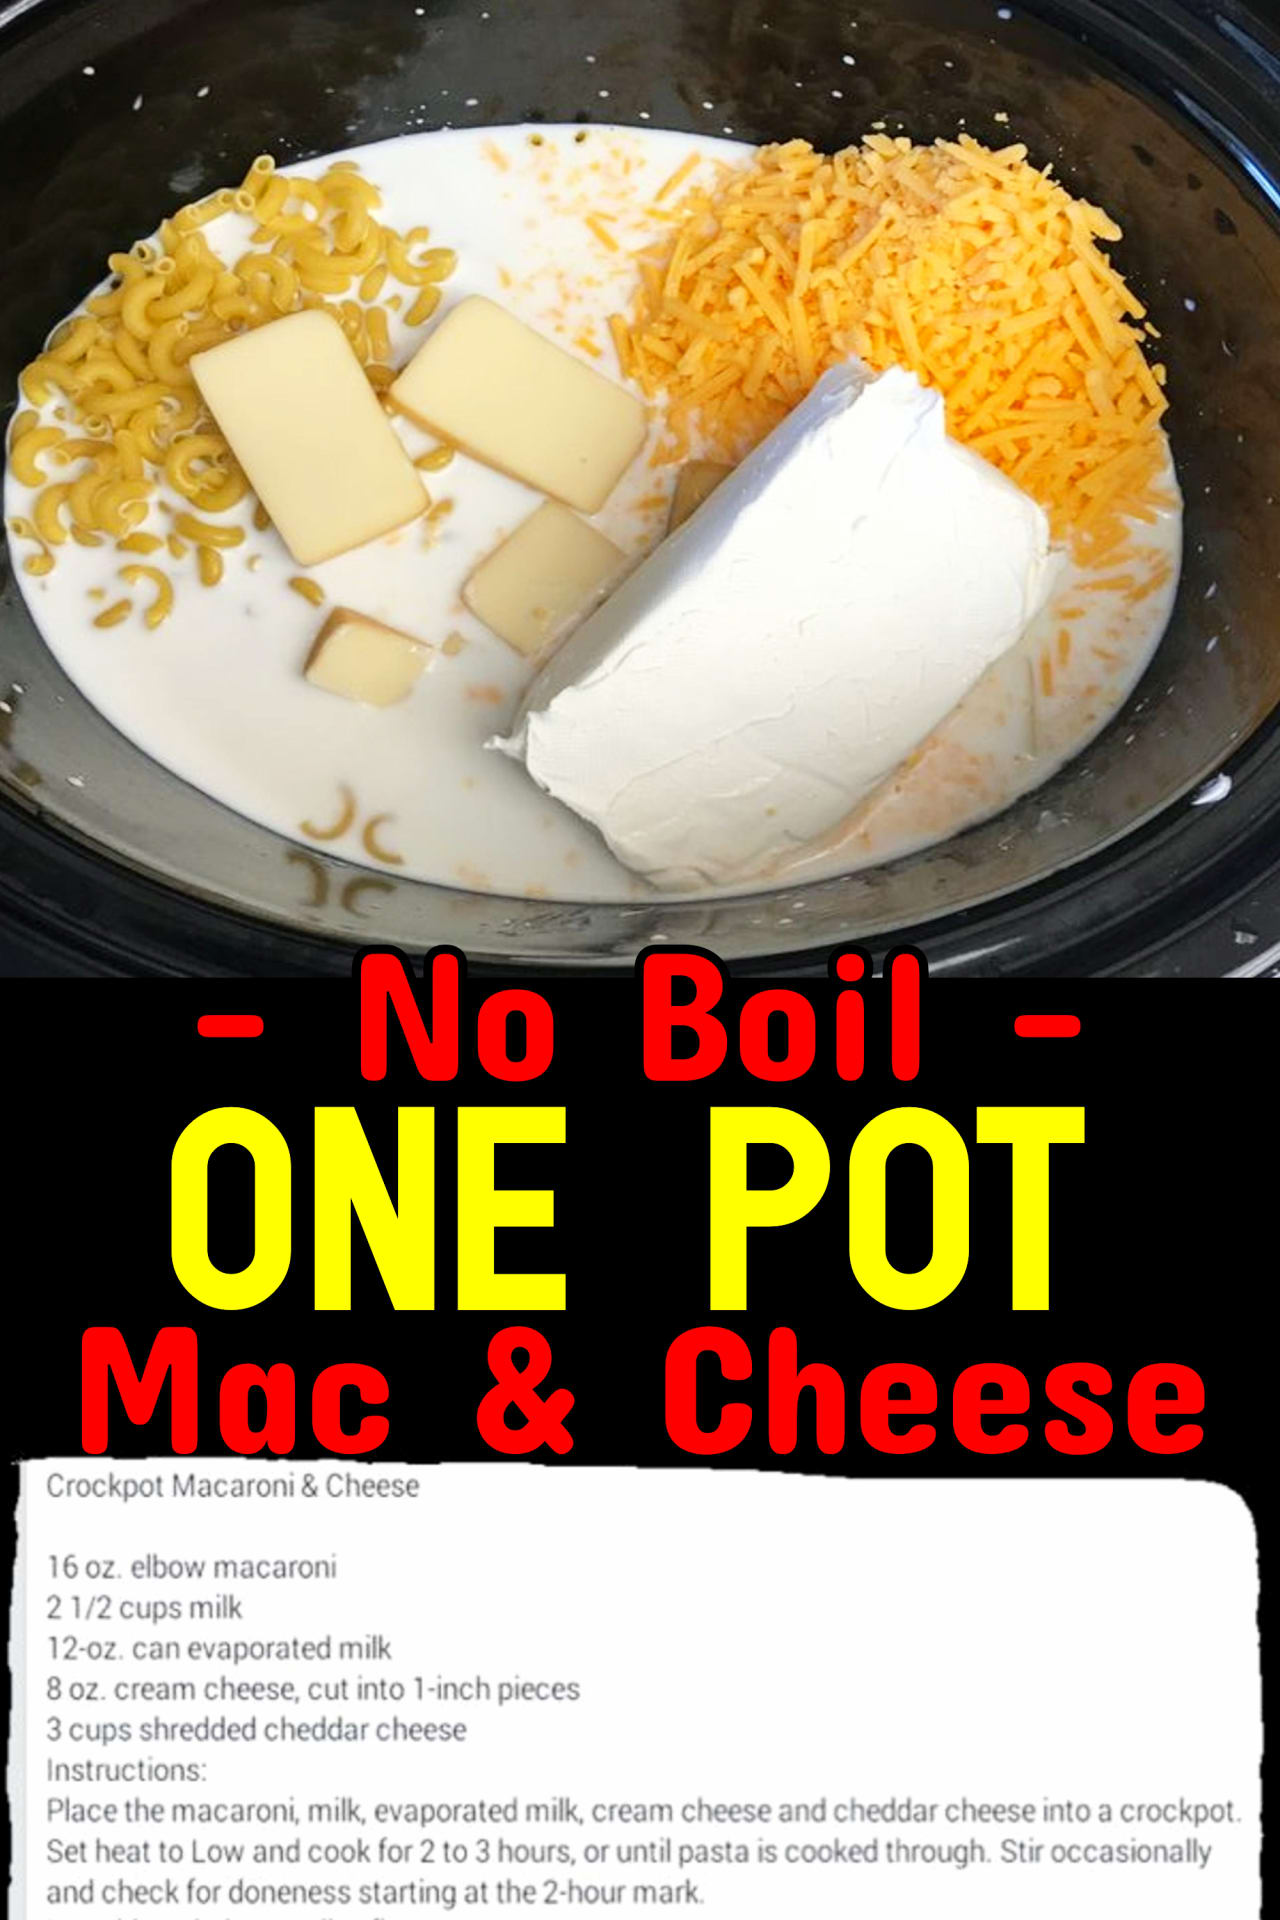 Crockpot mac and cheese - easy one pot no boil slow cooker macaroni and cheese recipes - if you like a traditional like grandma used to make mac and cheese, this is it!  Dump all ingredients in one pot and slow cook it!